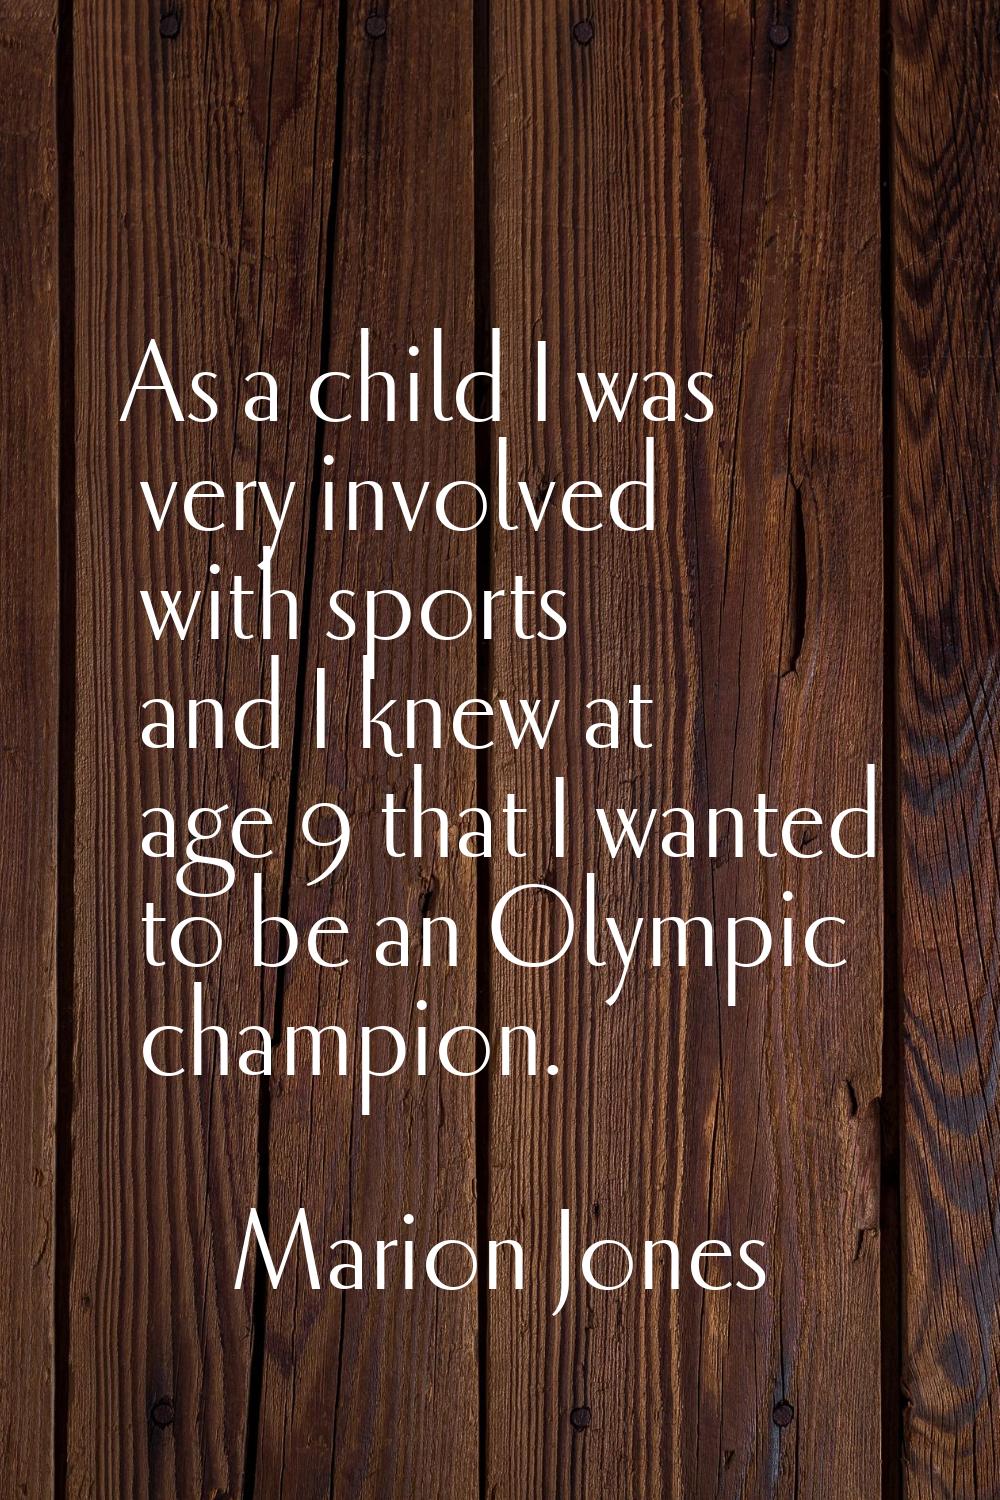 As a child I was very involved with sports and I knew at age 9 that I wanted to be an Olympic champ